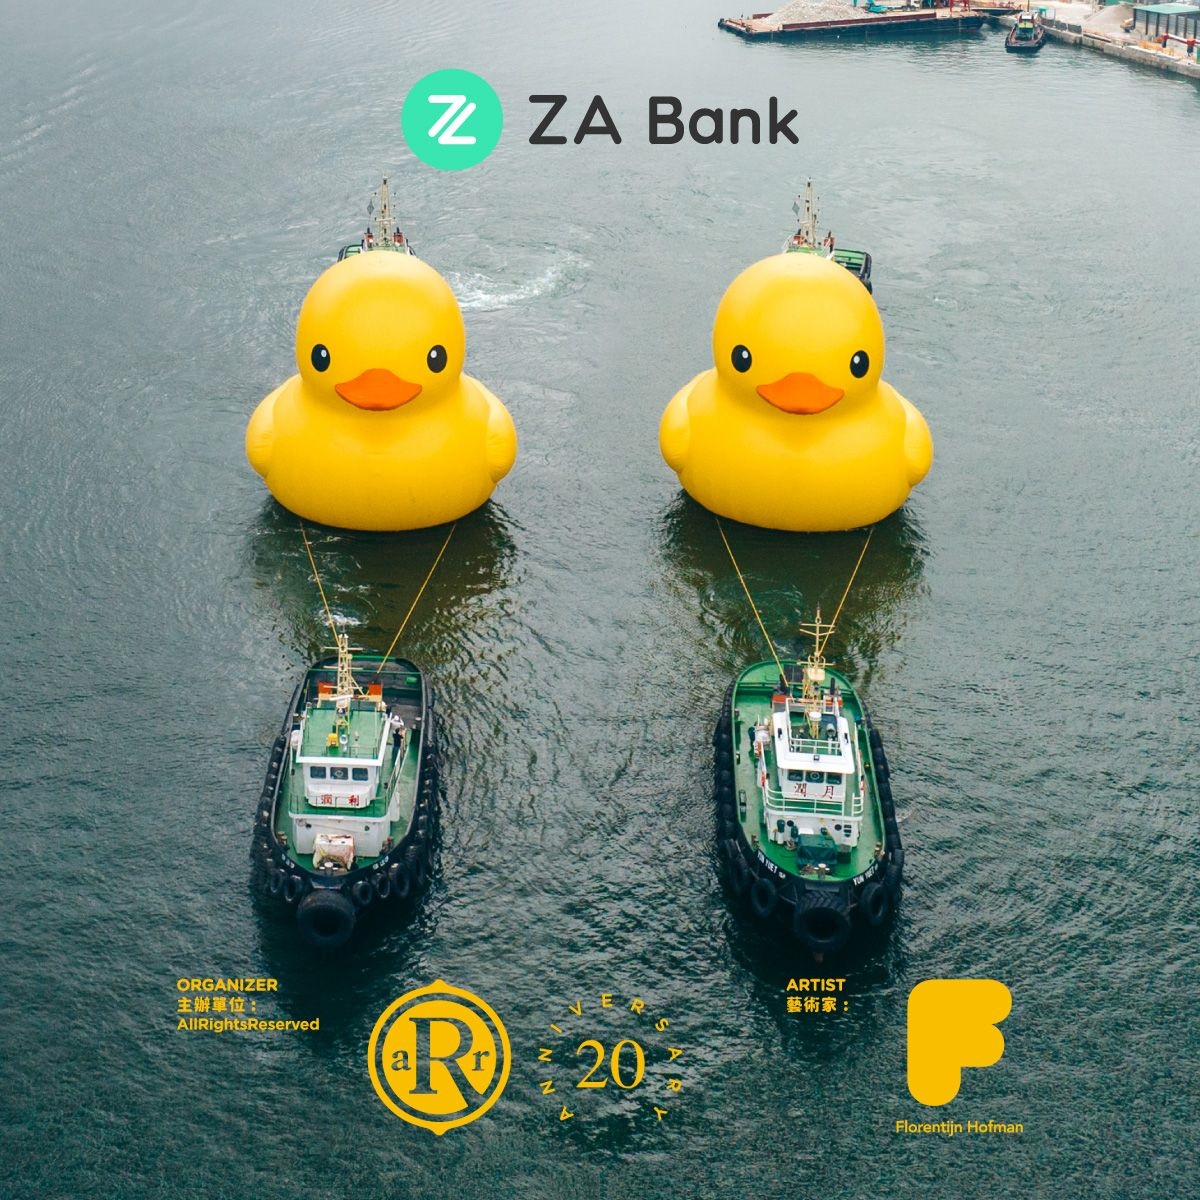 【ZA Bank】We're a sponsor of DOUBLE DUCKS: The Rubber Duck returns in 2023! 🥳